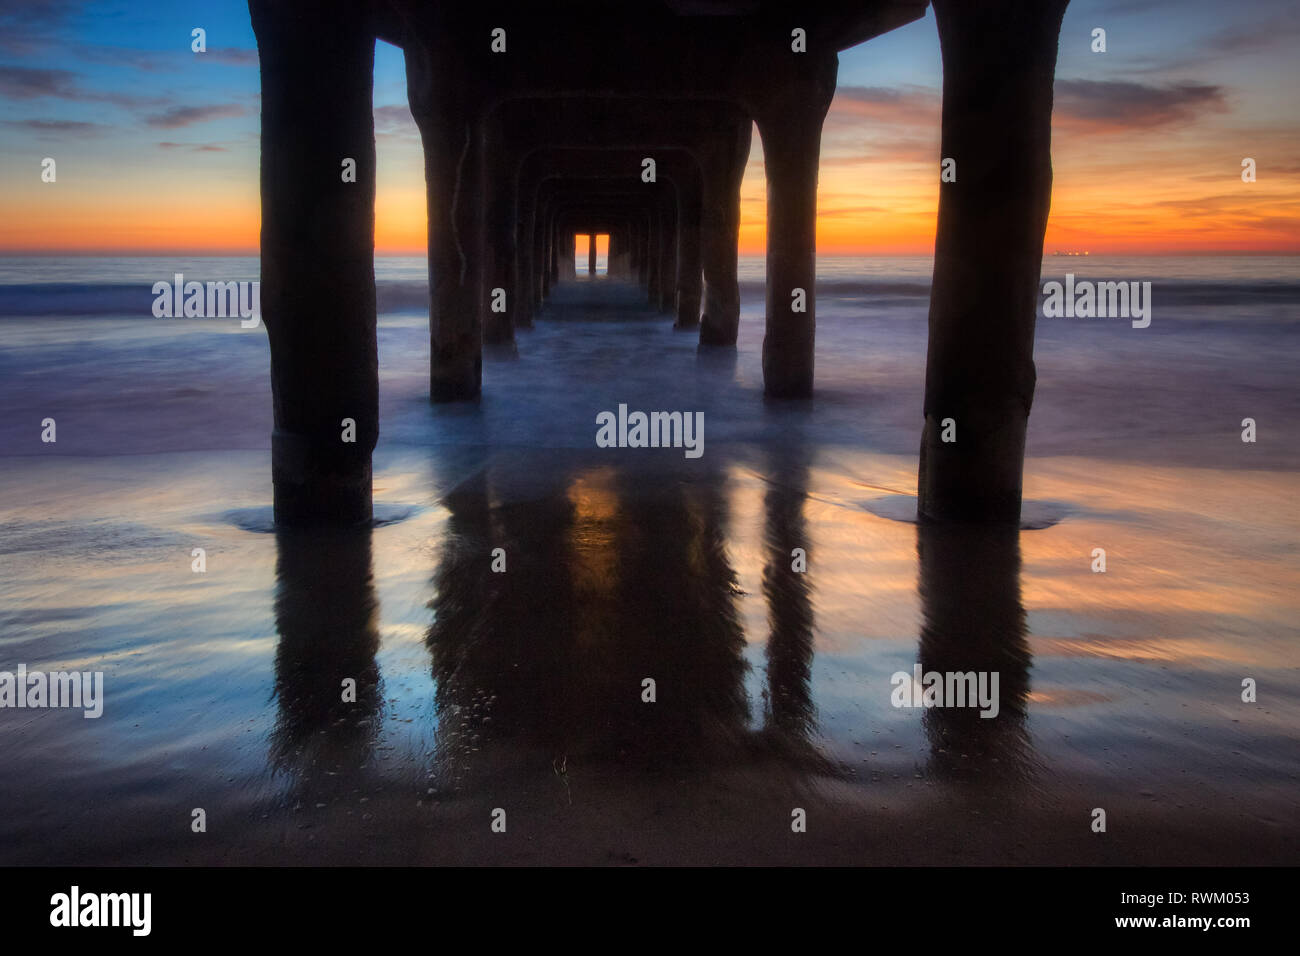 Long-exposure shot from under Manhattan Beach Pier after sunset with colorful sky and smooth waves washing onto the beach, Manhattan Beach, California Stock Photo